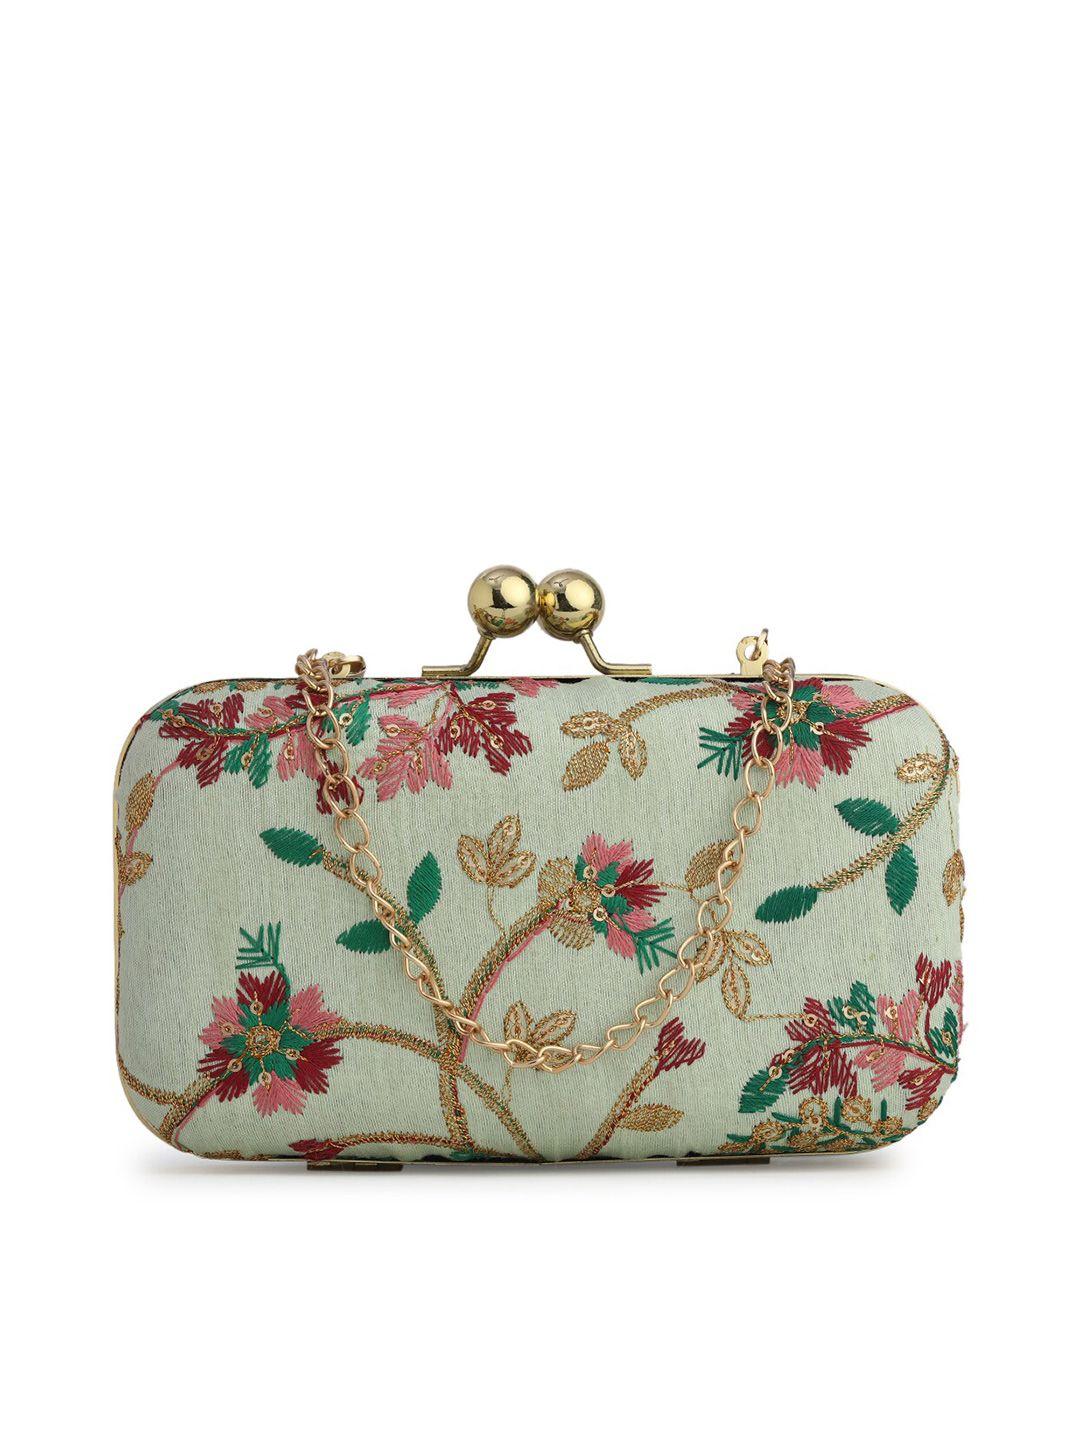 gaura pakhi off white & gold-toned embroidered box clutch